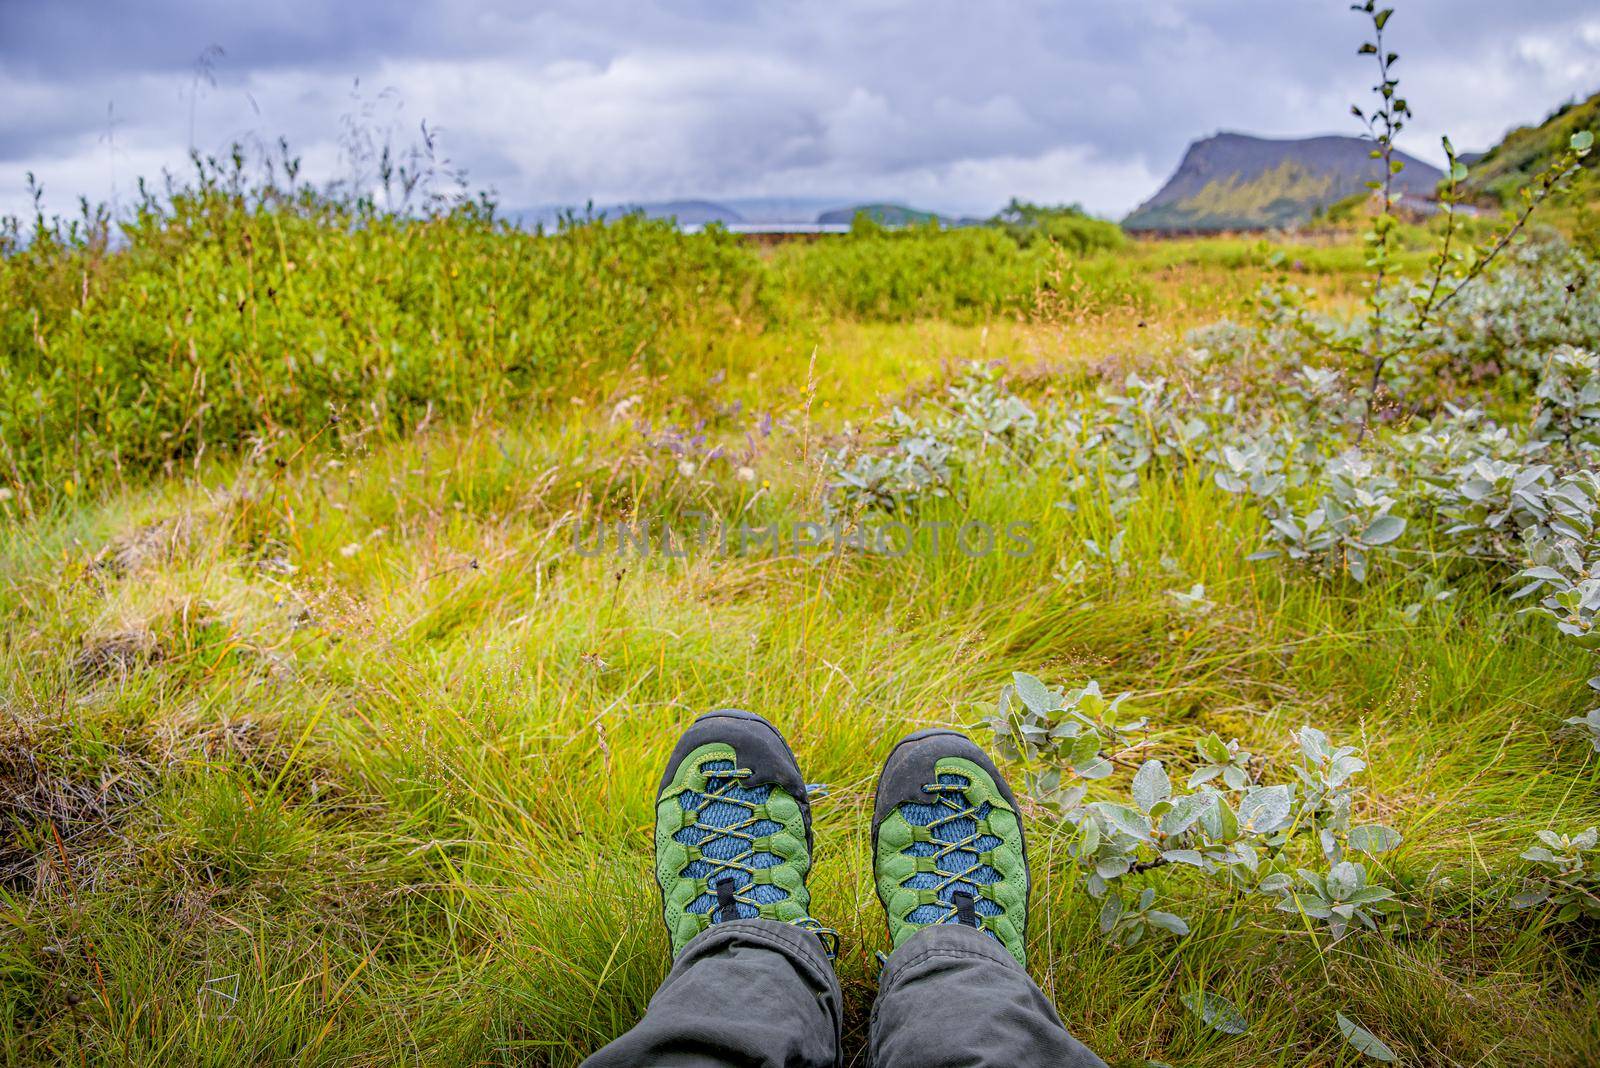 Looking at the rough nature in wild, while hiking in Iceland